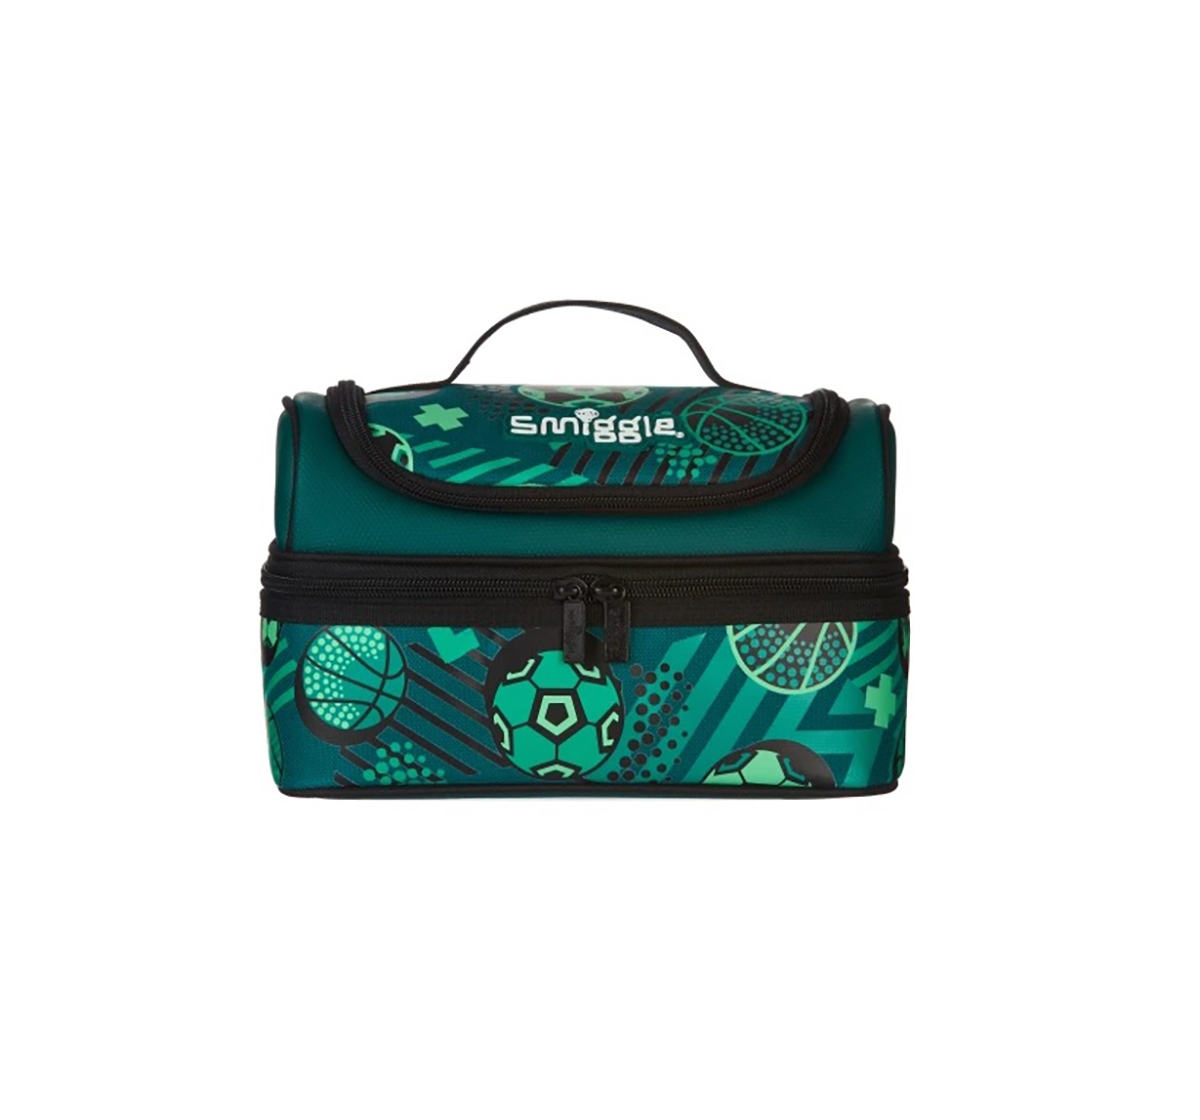 Smiggle | Smiggle Flow Double Decker Lunchbox - Football Print Bags for Kids age 3Y+ (Green) 1